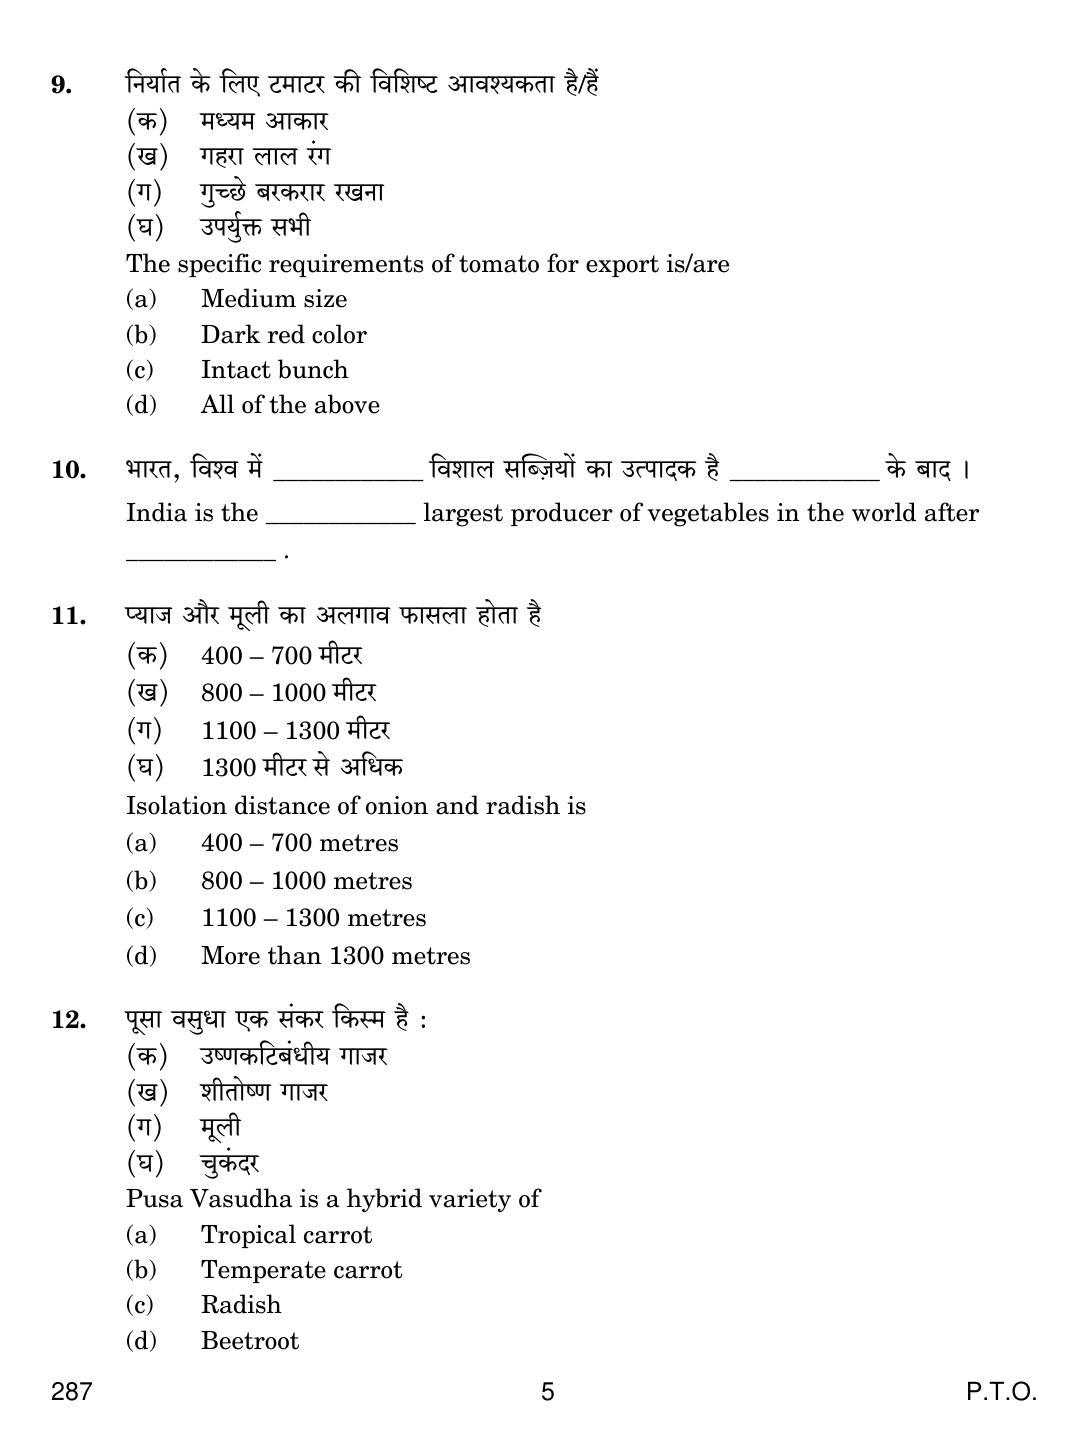 CBSE Class 12 287 Olericulture 2019 Question Paper - Page 5